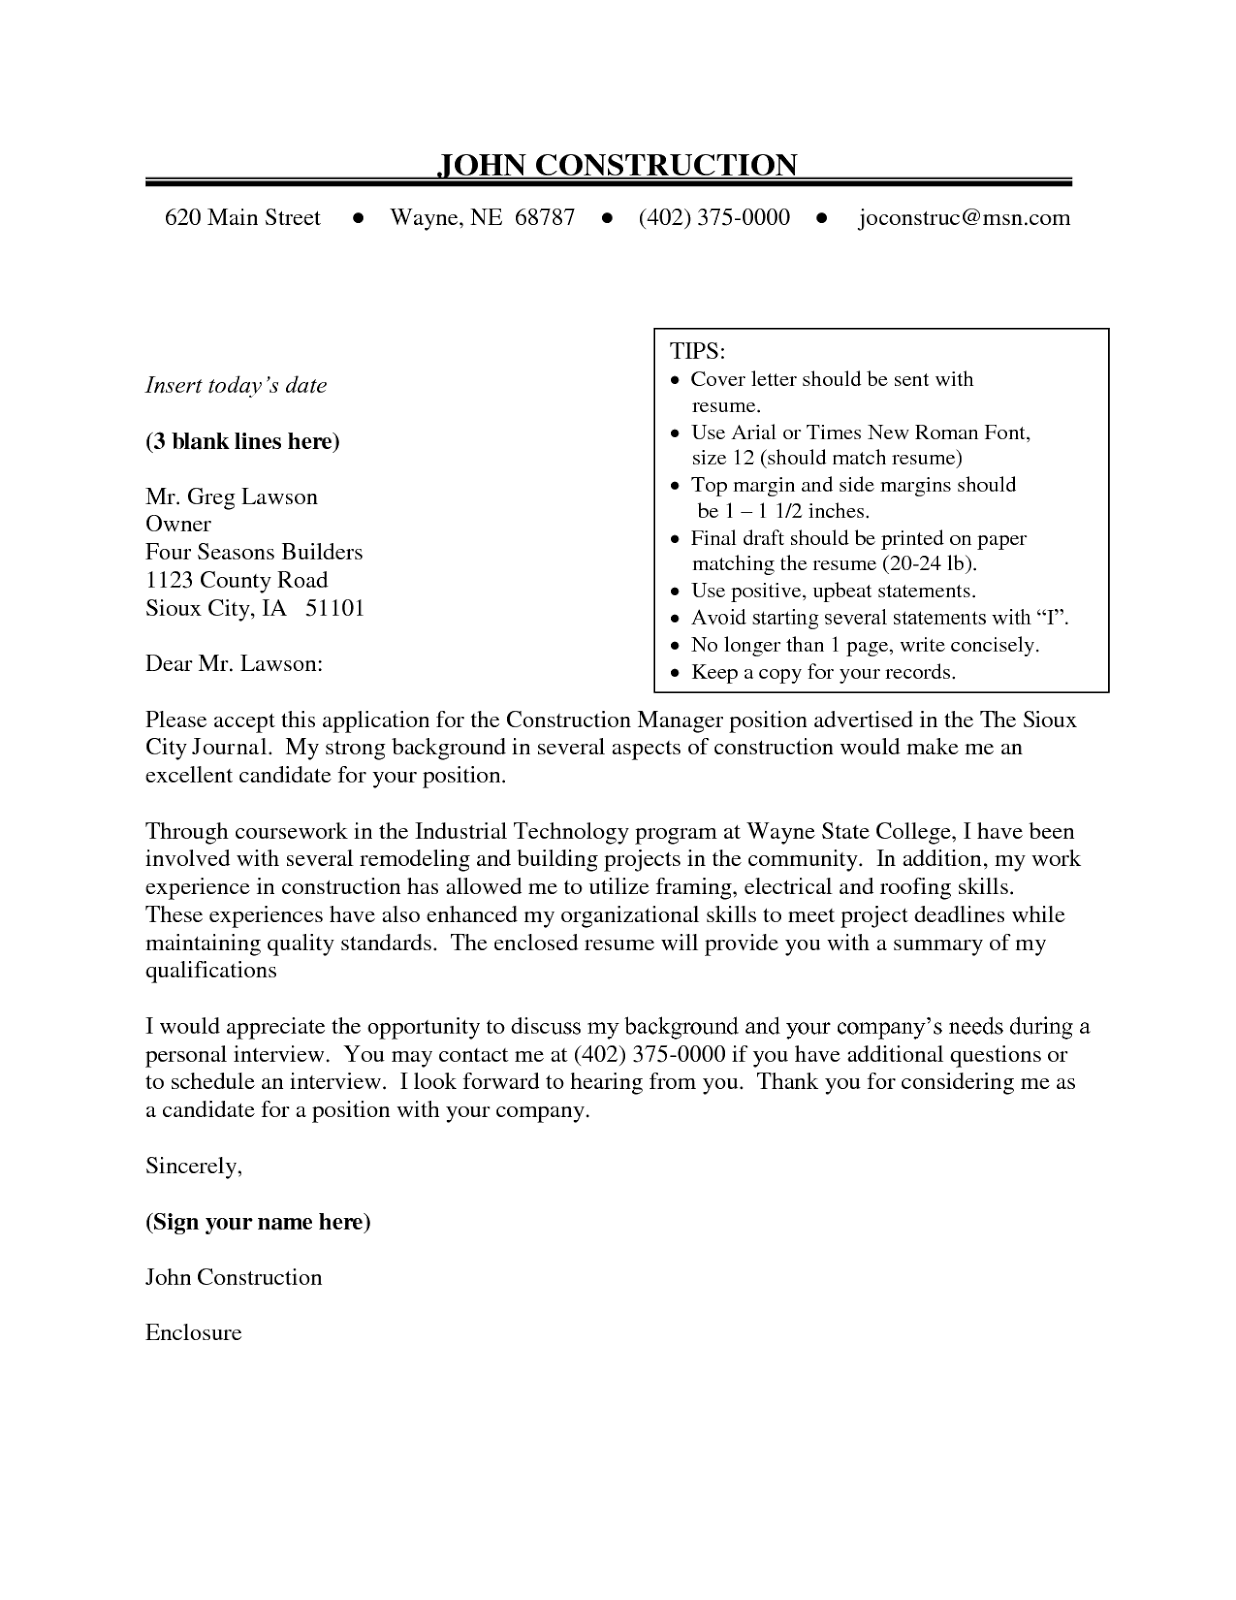 Cover letter designs for word